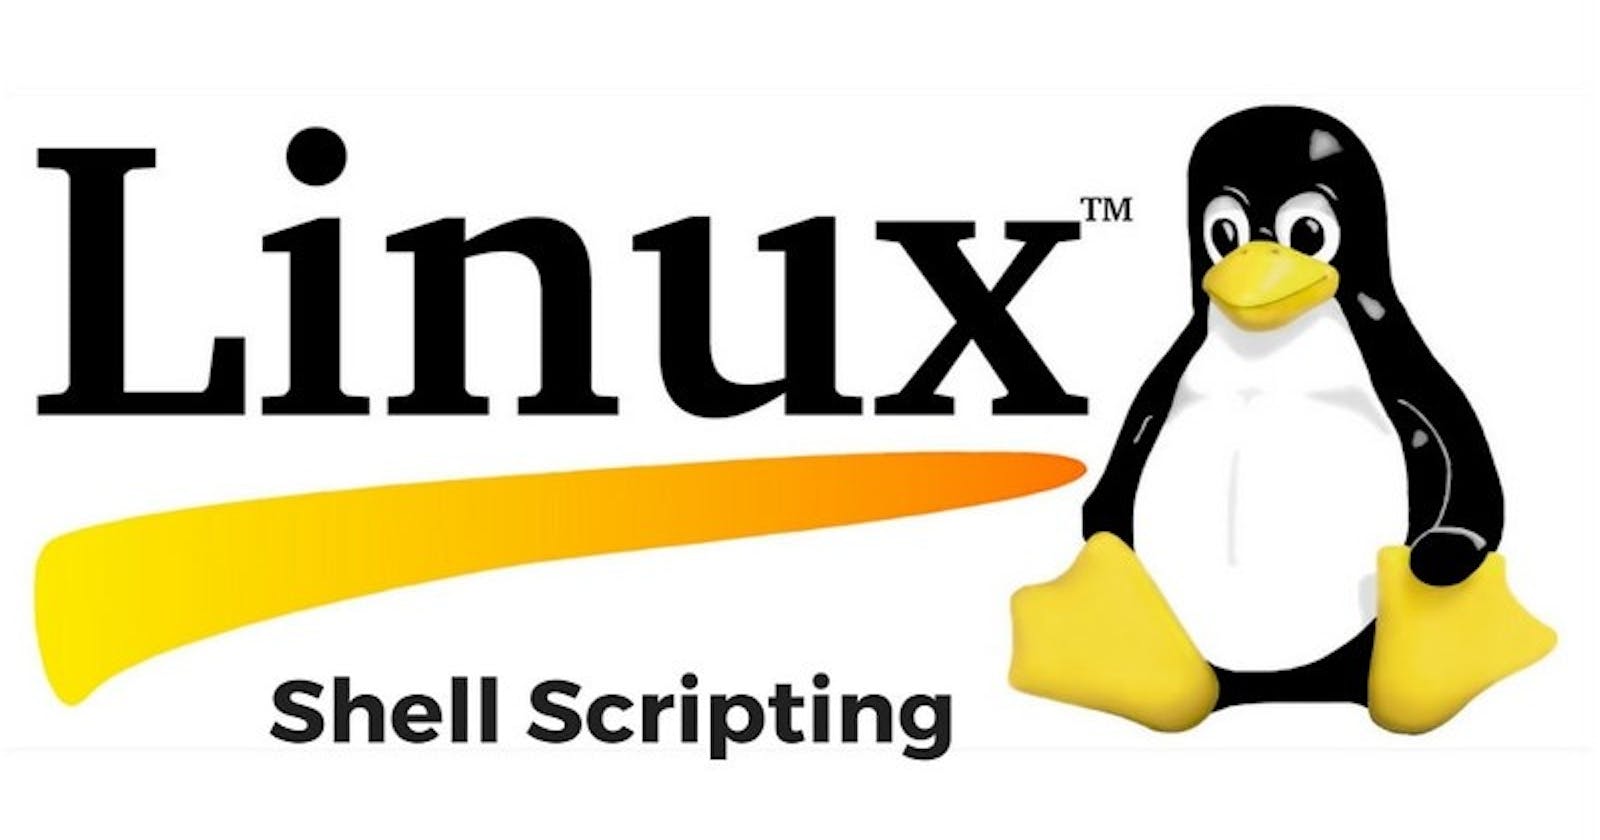 Advanced Linux Shell Scripting for DevOps Engineers with User management 🐧🚀